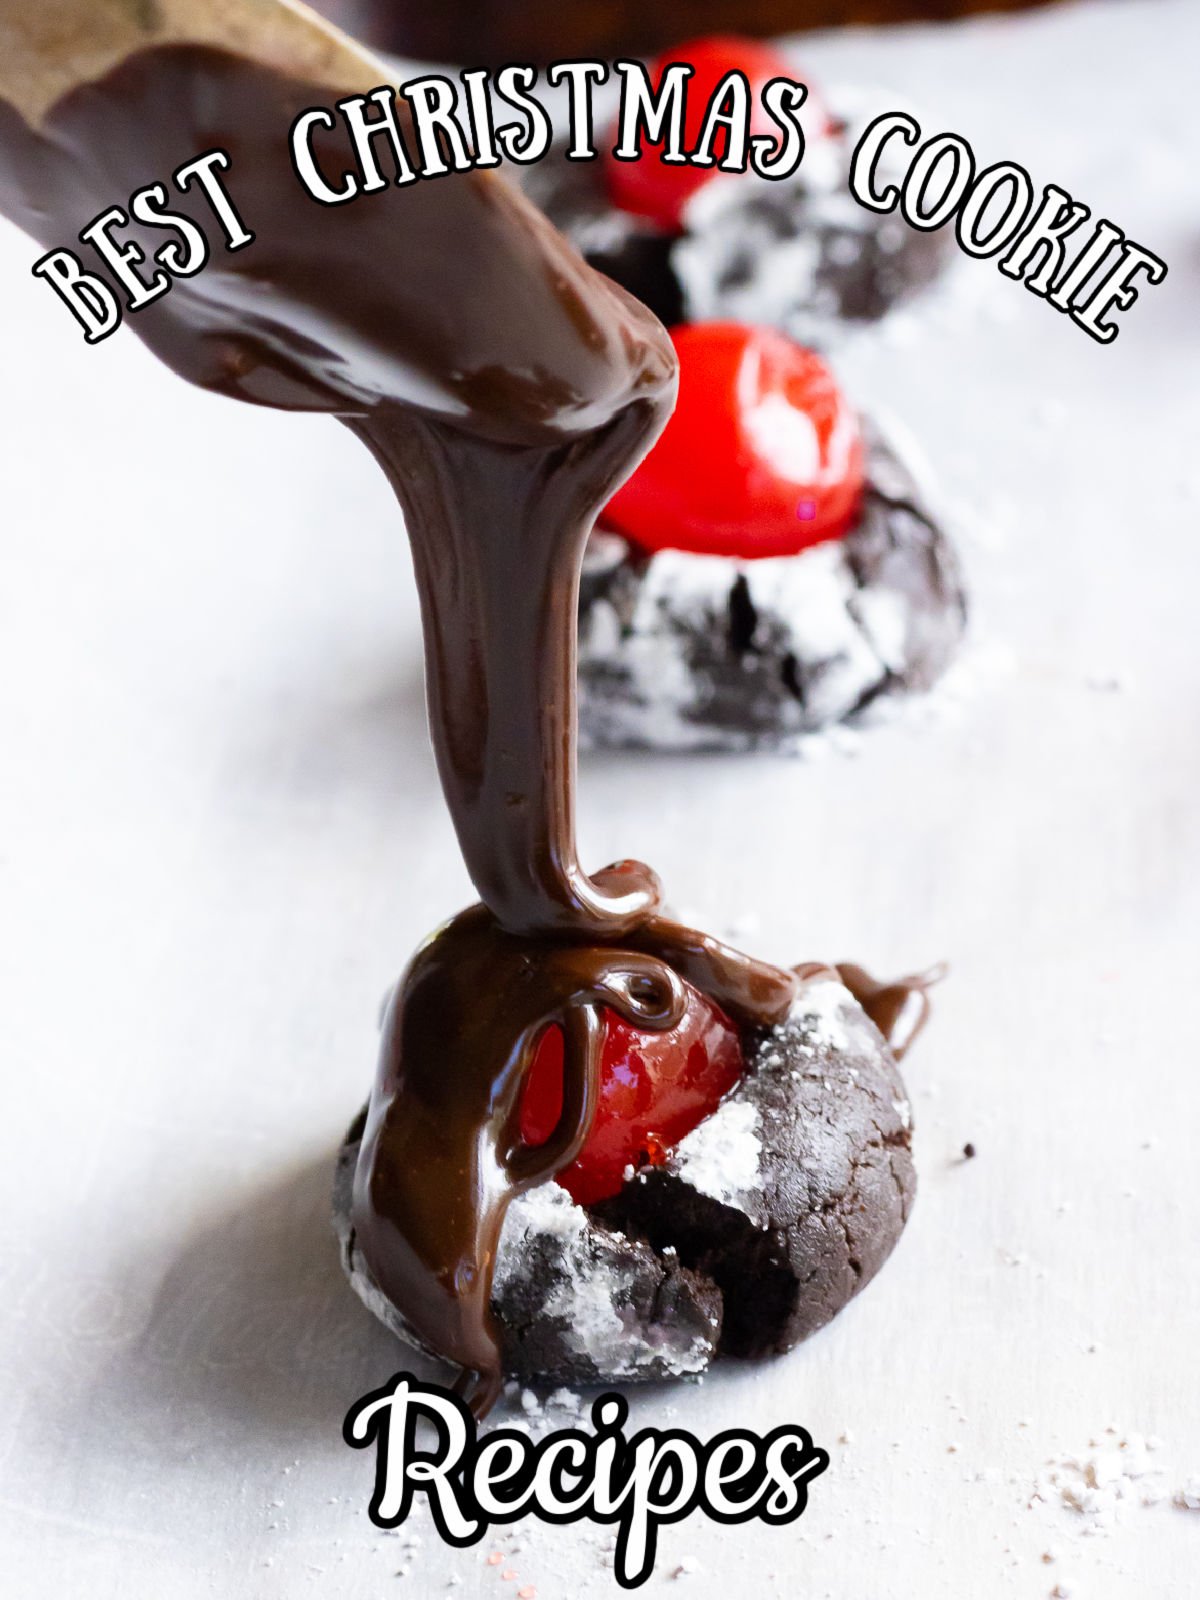 Chocolate being drizzled over a chocolate cherry cookie. TItle text overlay.